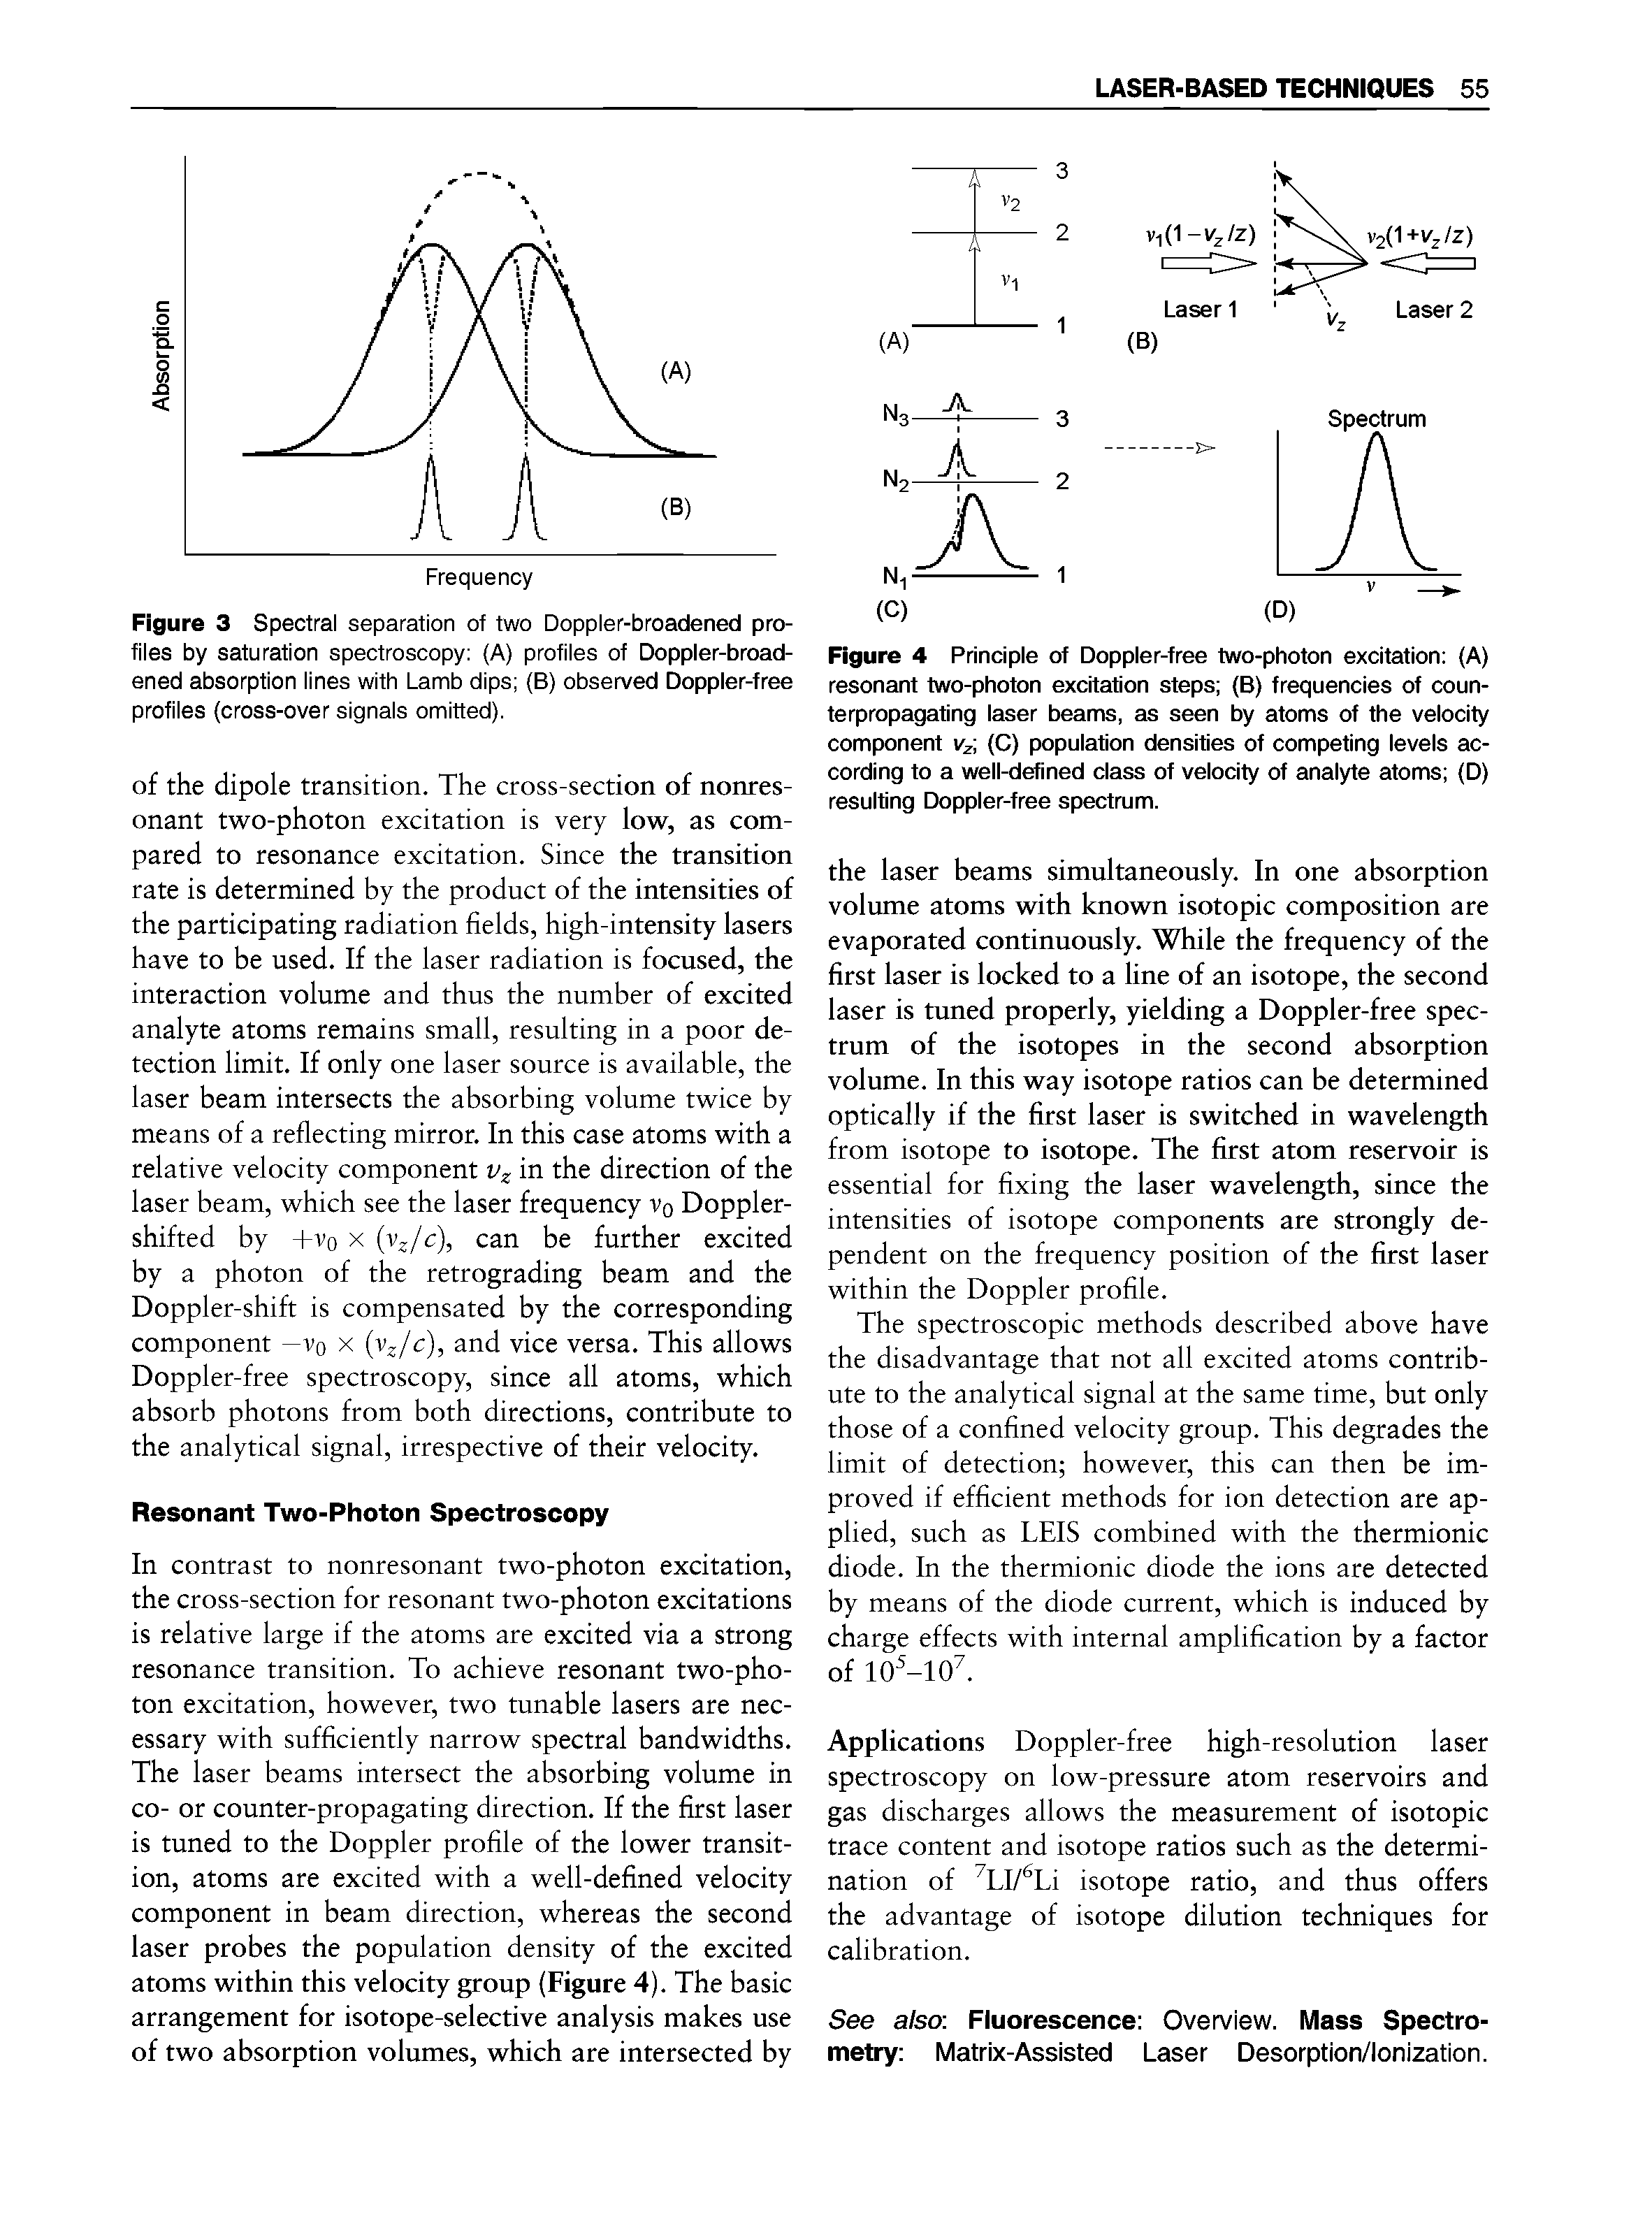 Figure 4 Principle of Doppler-free two-photon excitation (A) resonant two-photon excitation steps (B) frequencies of coun-terpropagating laser beams, as seen by atoms of the velocity component v (C) population densities of competing levels according to a well-defined class of velocity of analyte atoms (D) resulting Doppler-free spectrum.